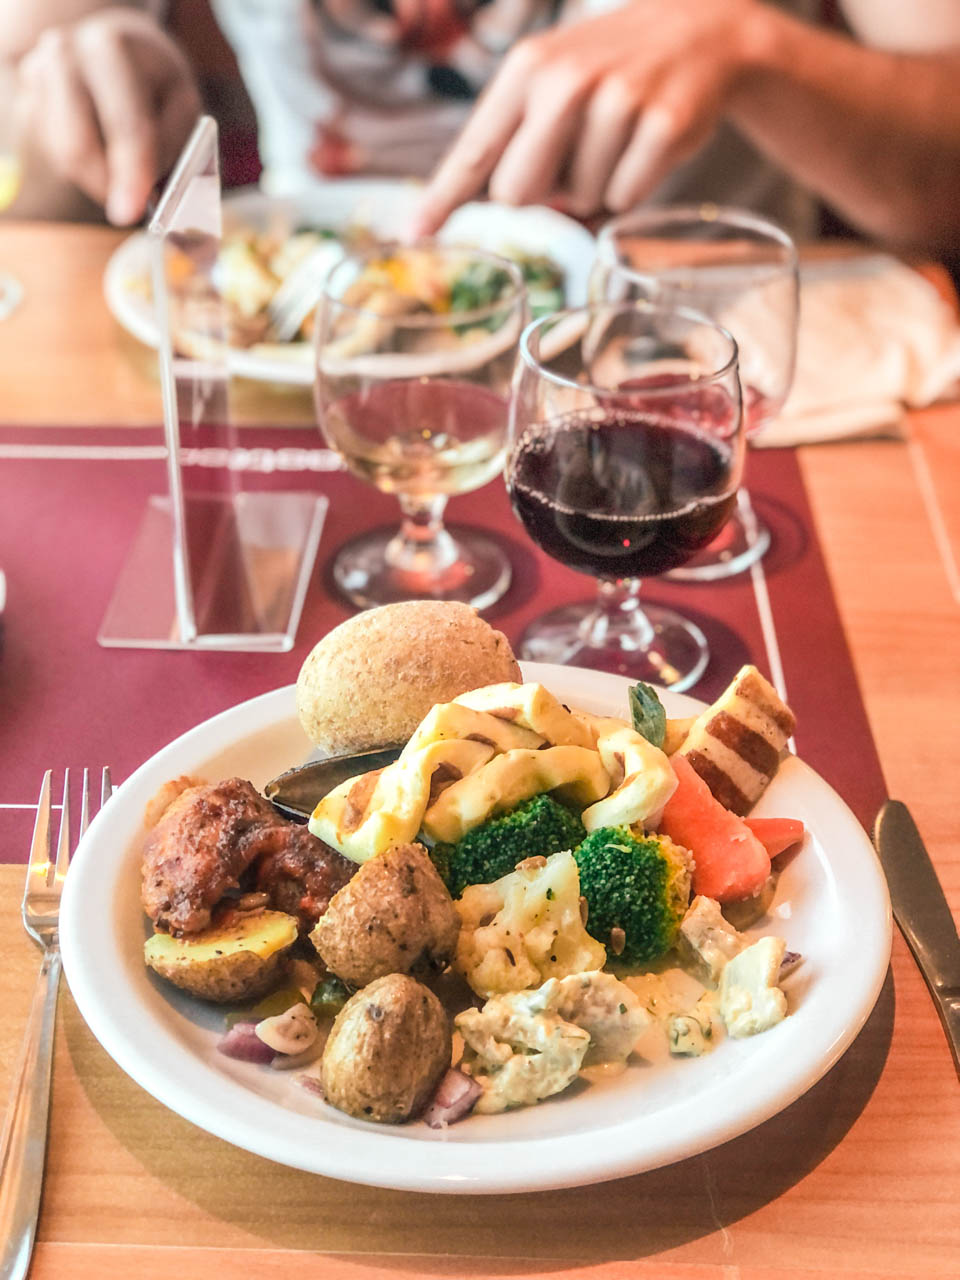 A close-up photo of a plate filled with different kinds of meats and vegetables next to three wine glasses